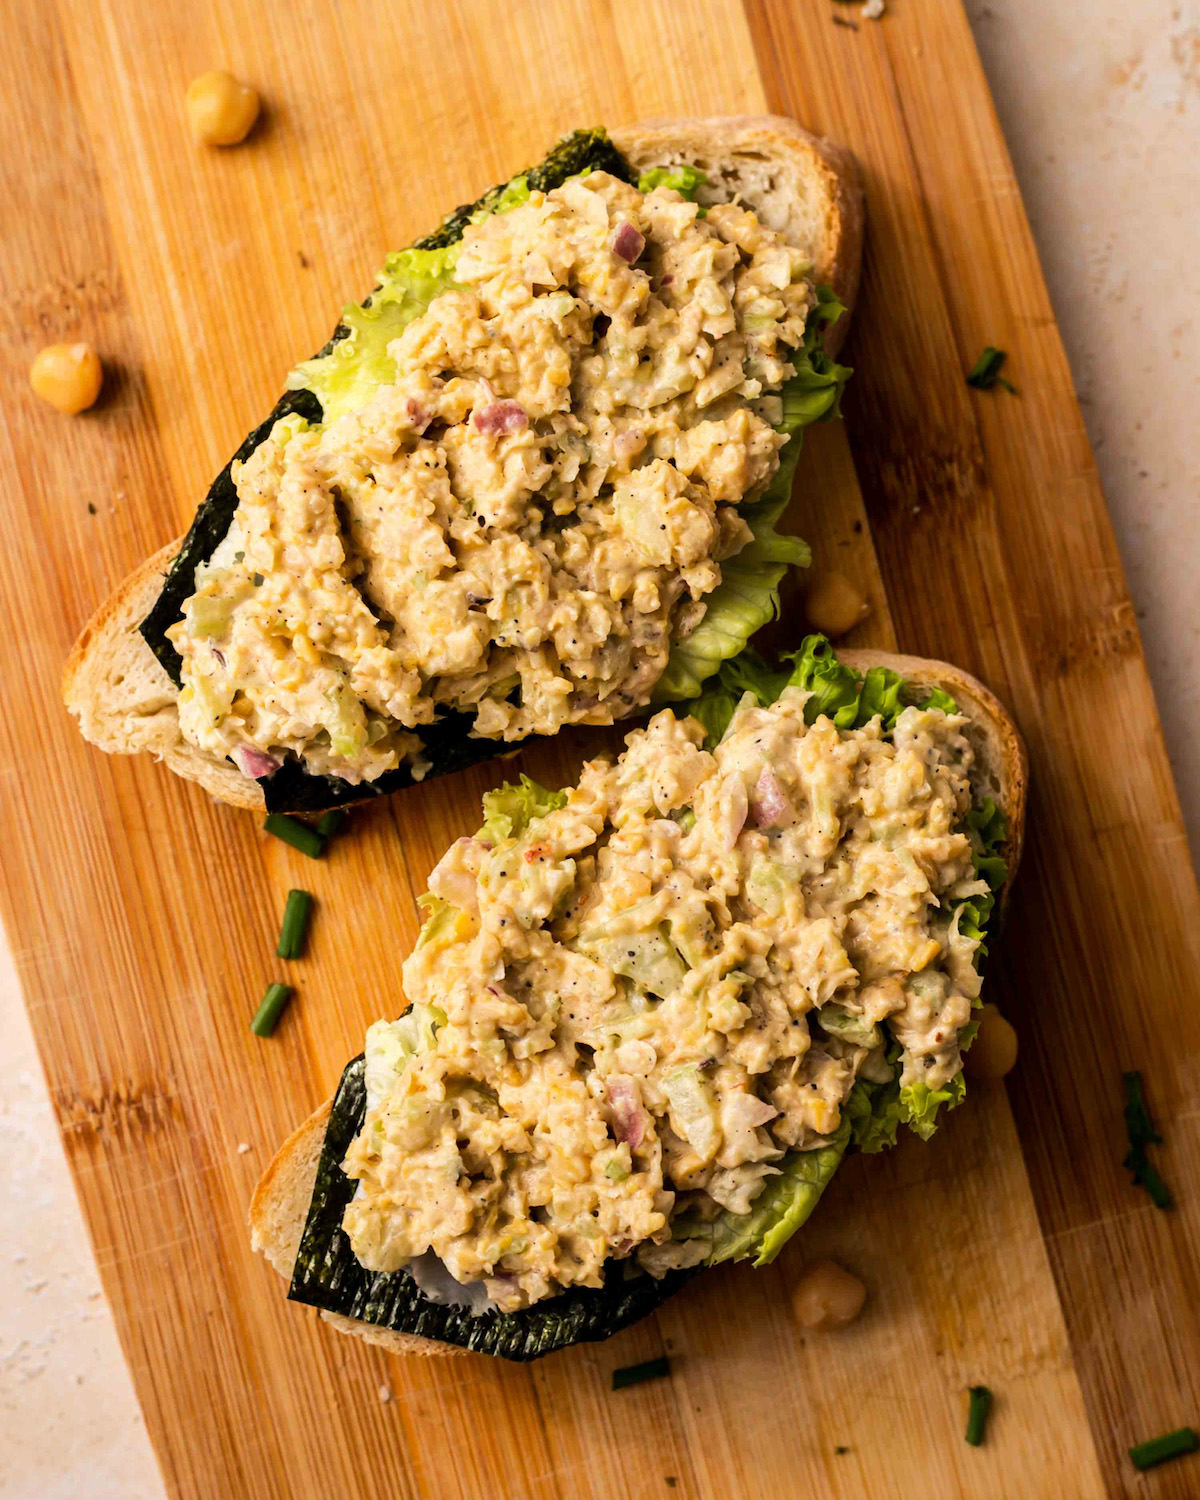 An overhead shot of two slices of vegan chickpea tuna salad on a wooden cutting board.